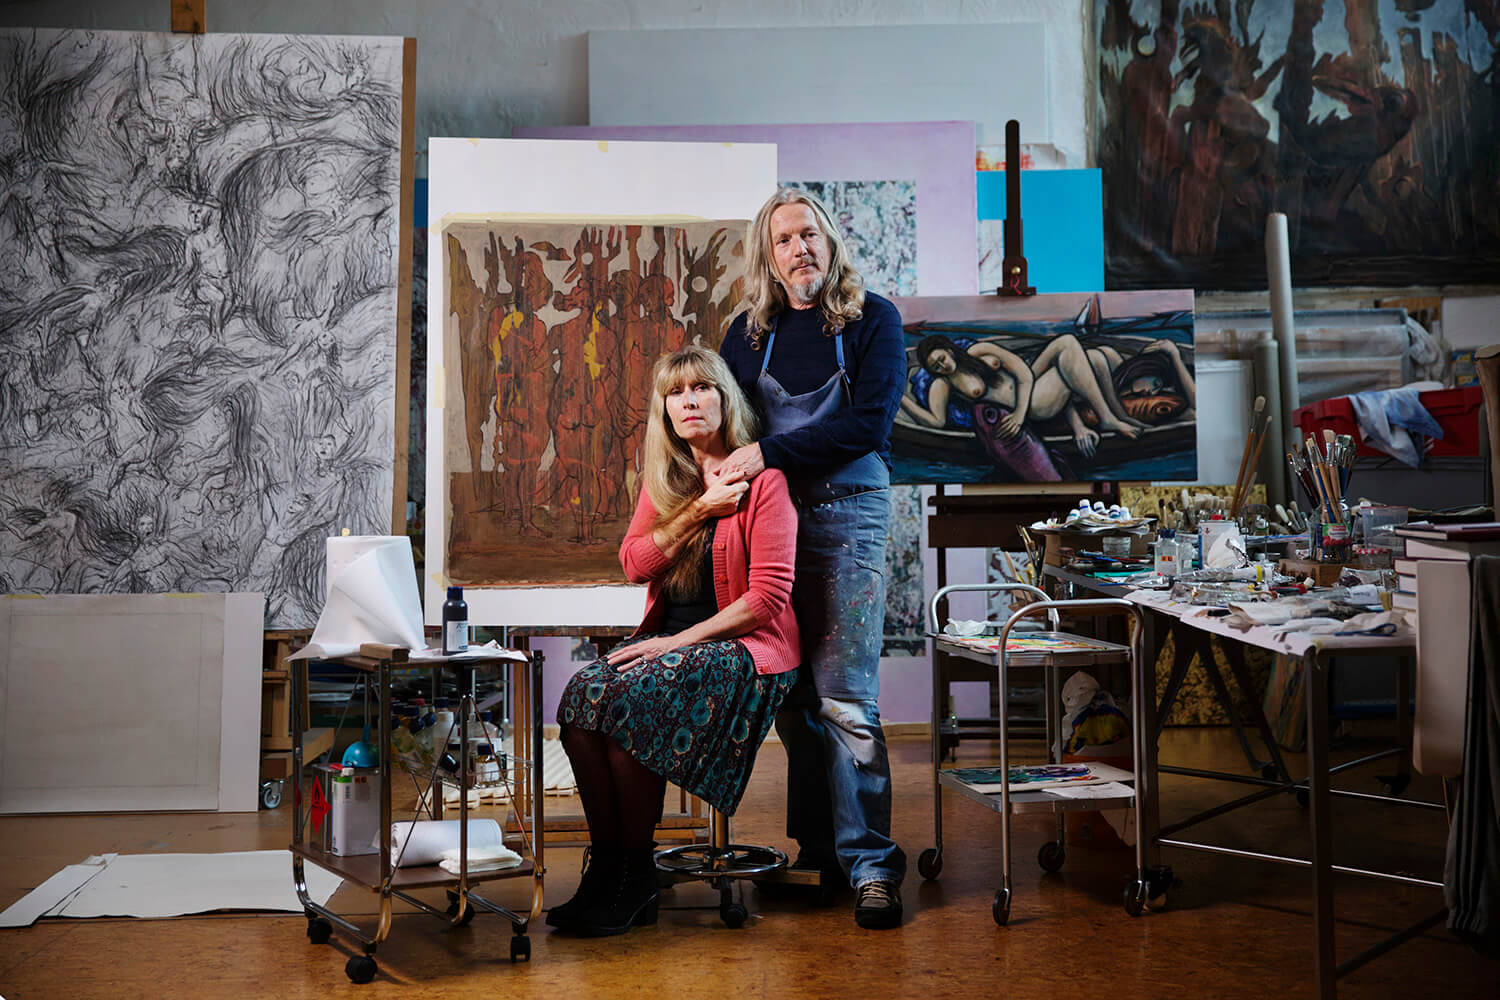 The image shows a man and a woman standing in front of an easel in an art studio. The man is wearing a blue shirt and the woman is wearing a black and red dress and a red sweater. They are both looking at the camera. There are several paintings on the walls behind them.